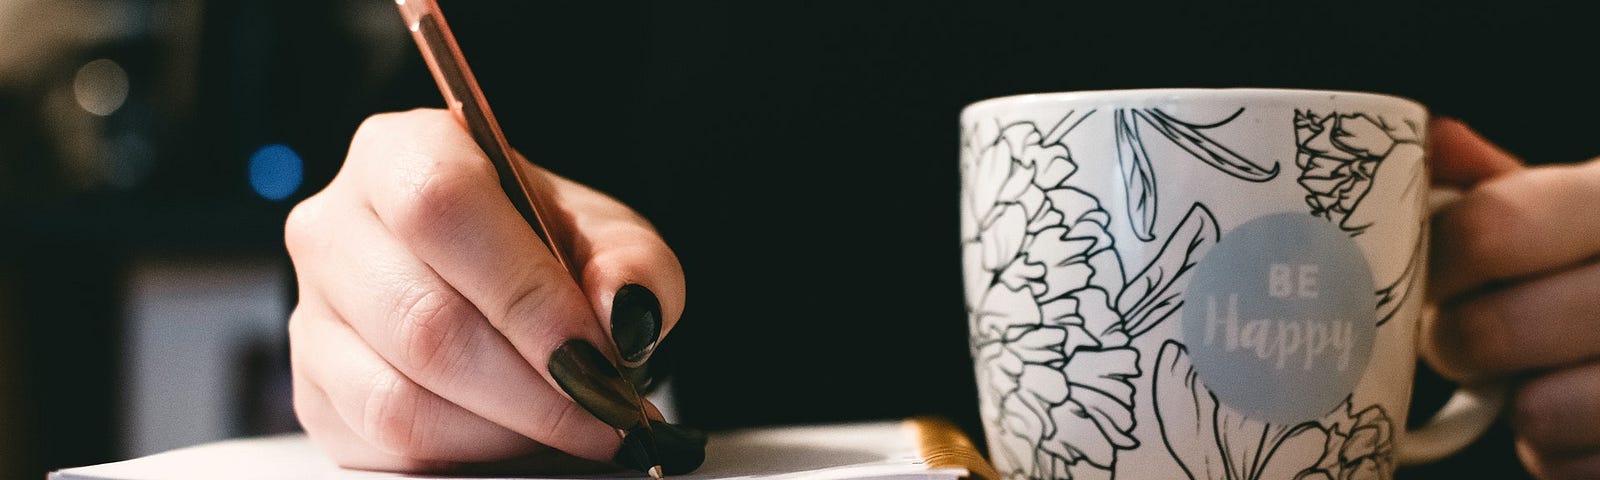 A person with long painted nails writes in their notebook. A floral mug with the words “Be Happy” rests in their other hand.